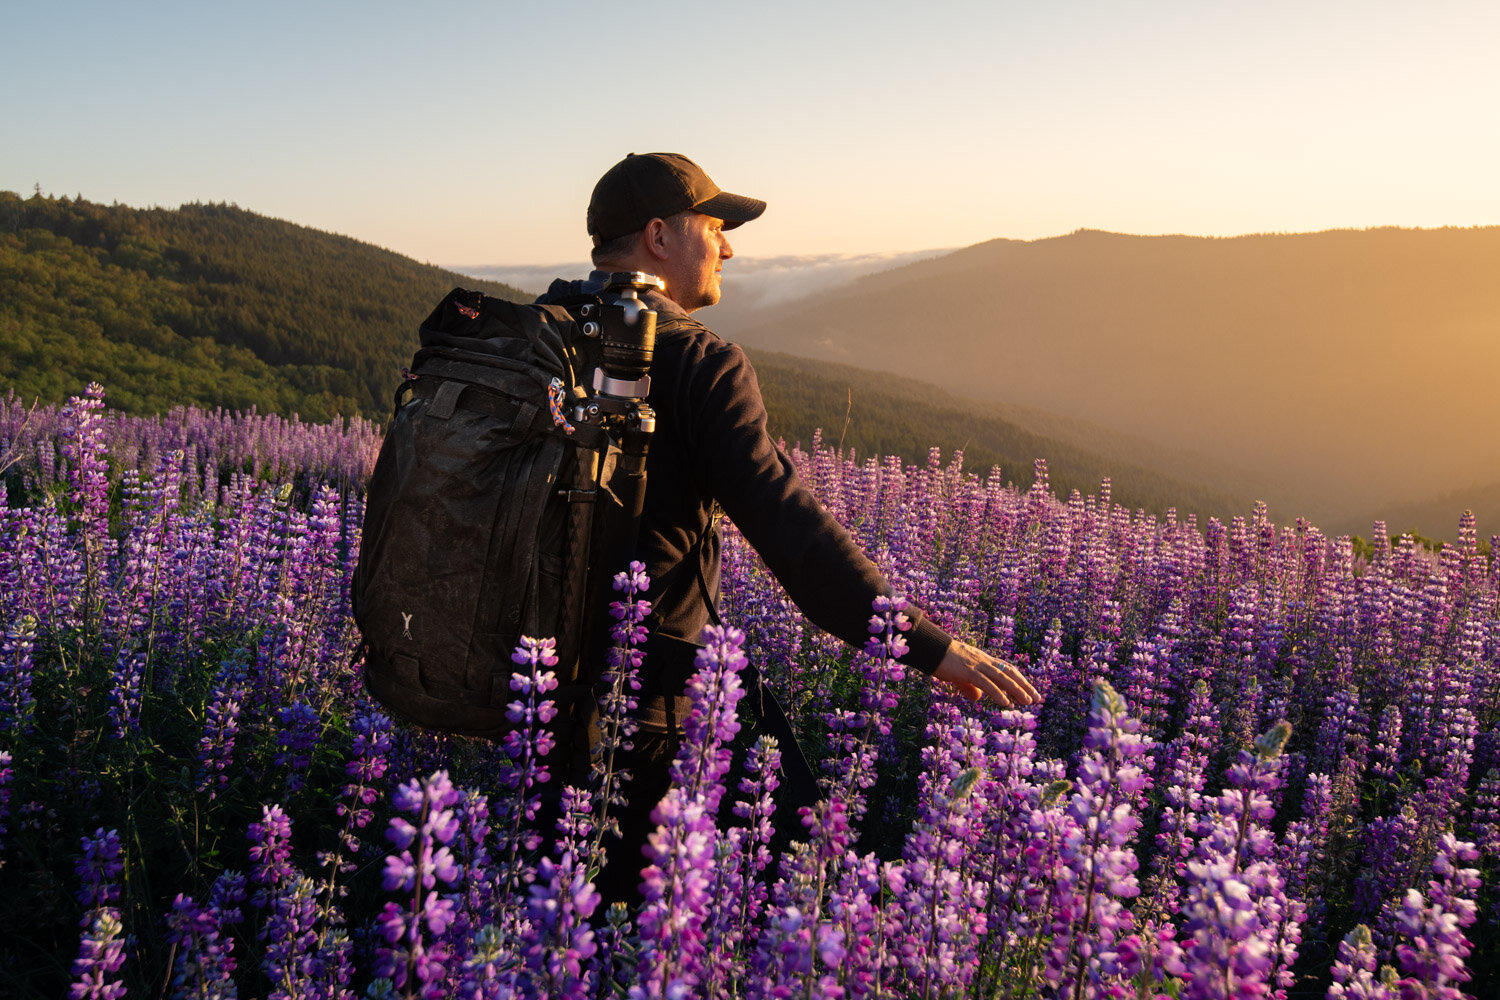 Chris walking in a field of lupine flowers at Bald hills California. | Titled: Bald Hills Portrait | ©2020 Chris Byrne